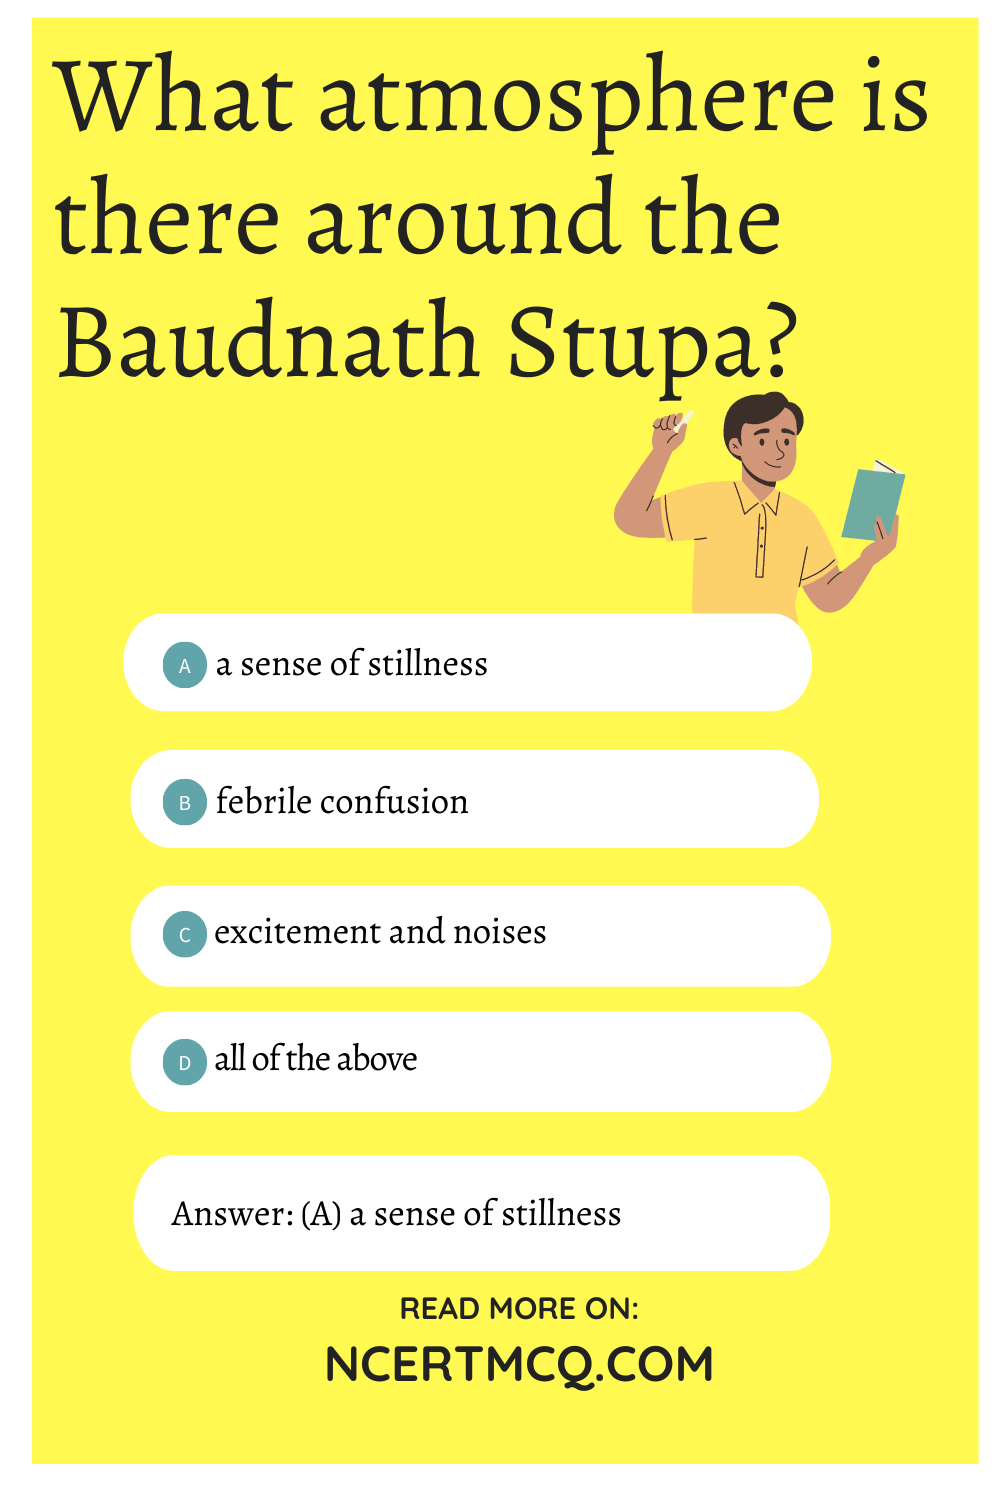 What atmosphere is there around the Baudnath Stupa?